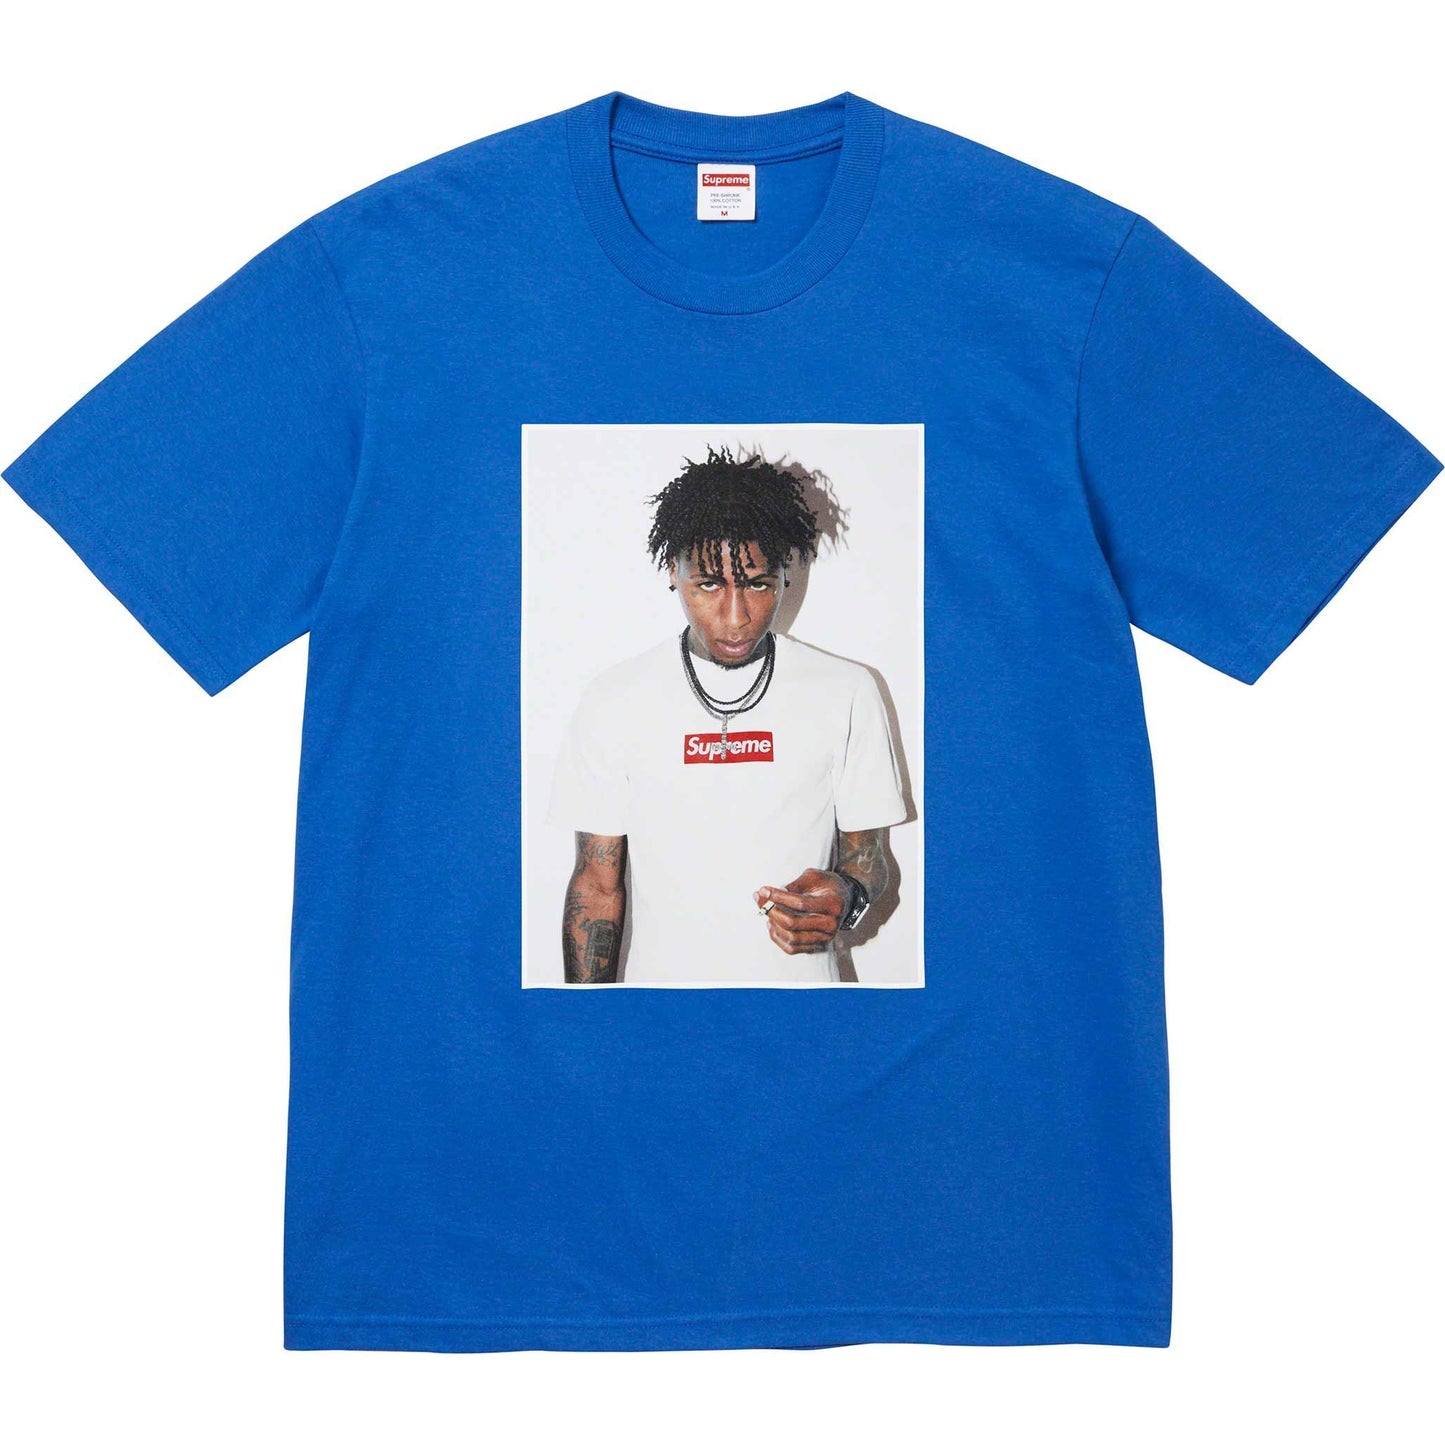 Supreme NBA Youngboy Tee Blue from Supreme